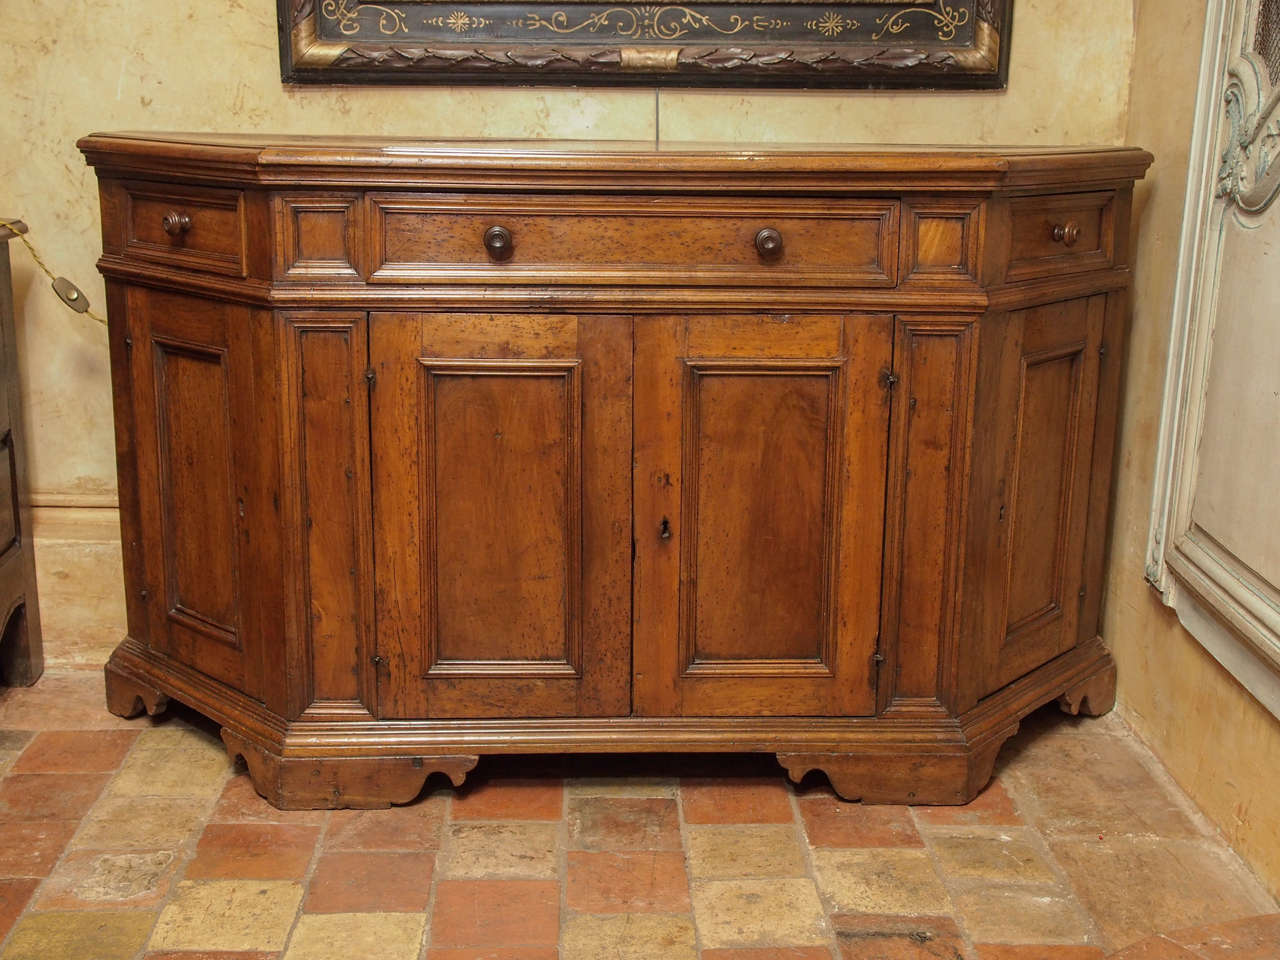 18th century Italian walnut enfilade with three drawers from Naples, circa 1780.